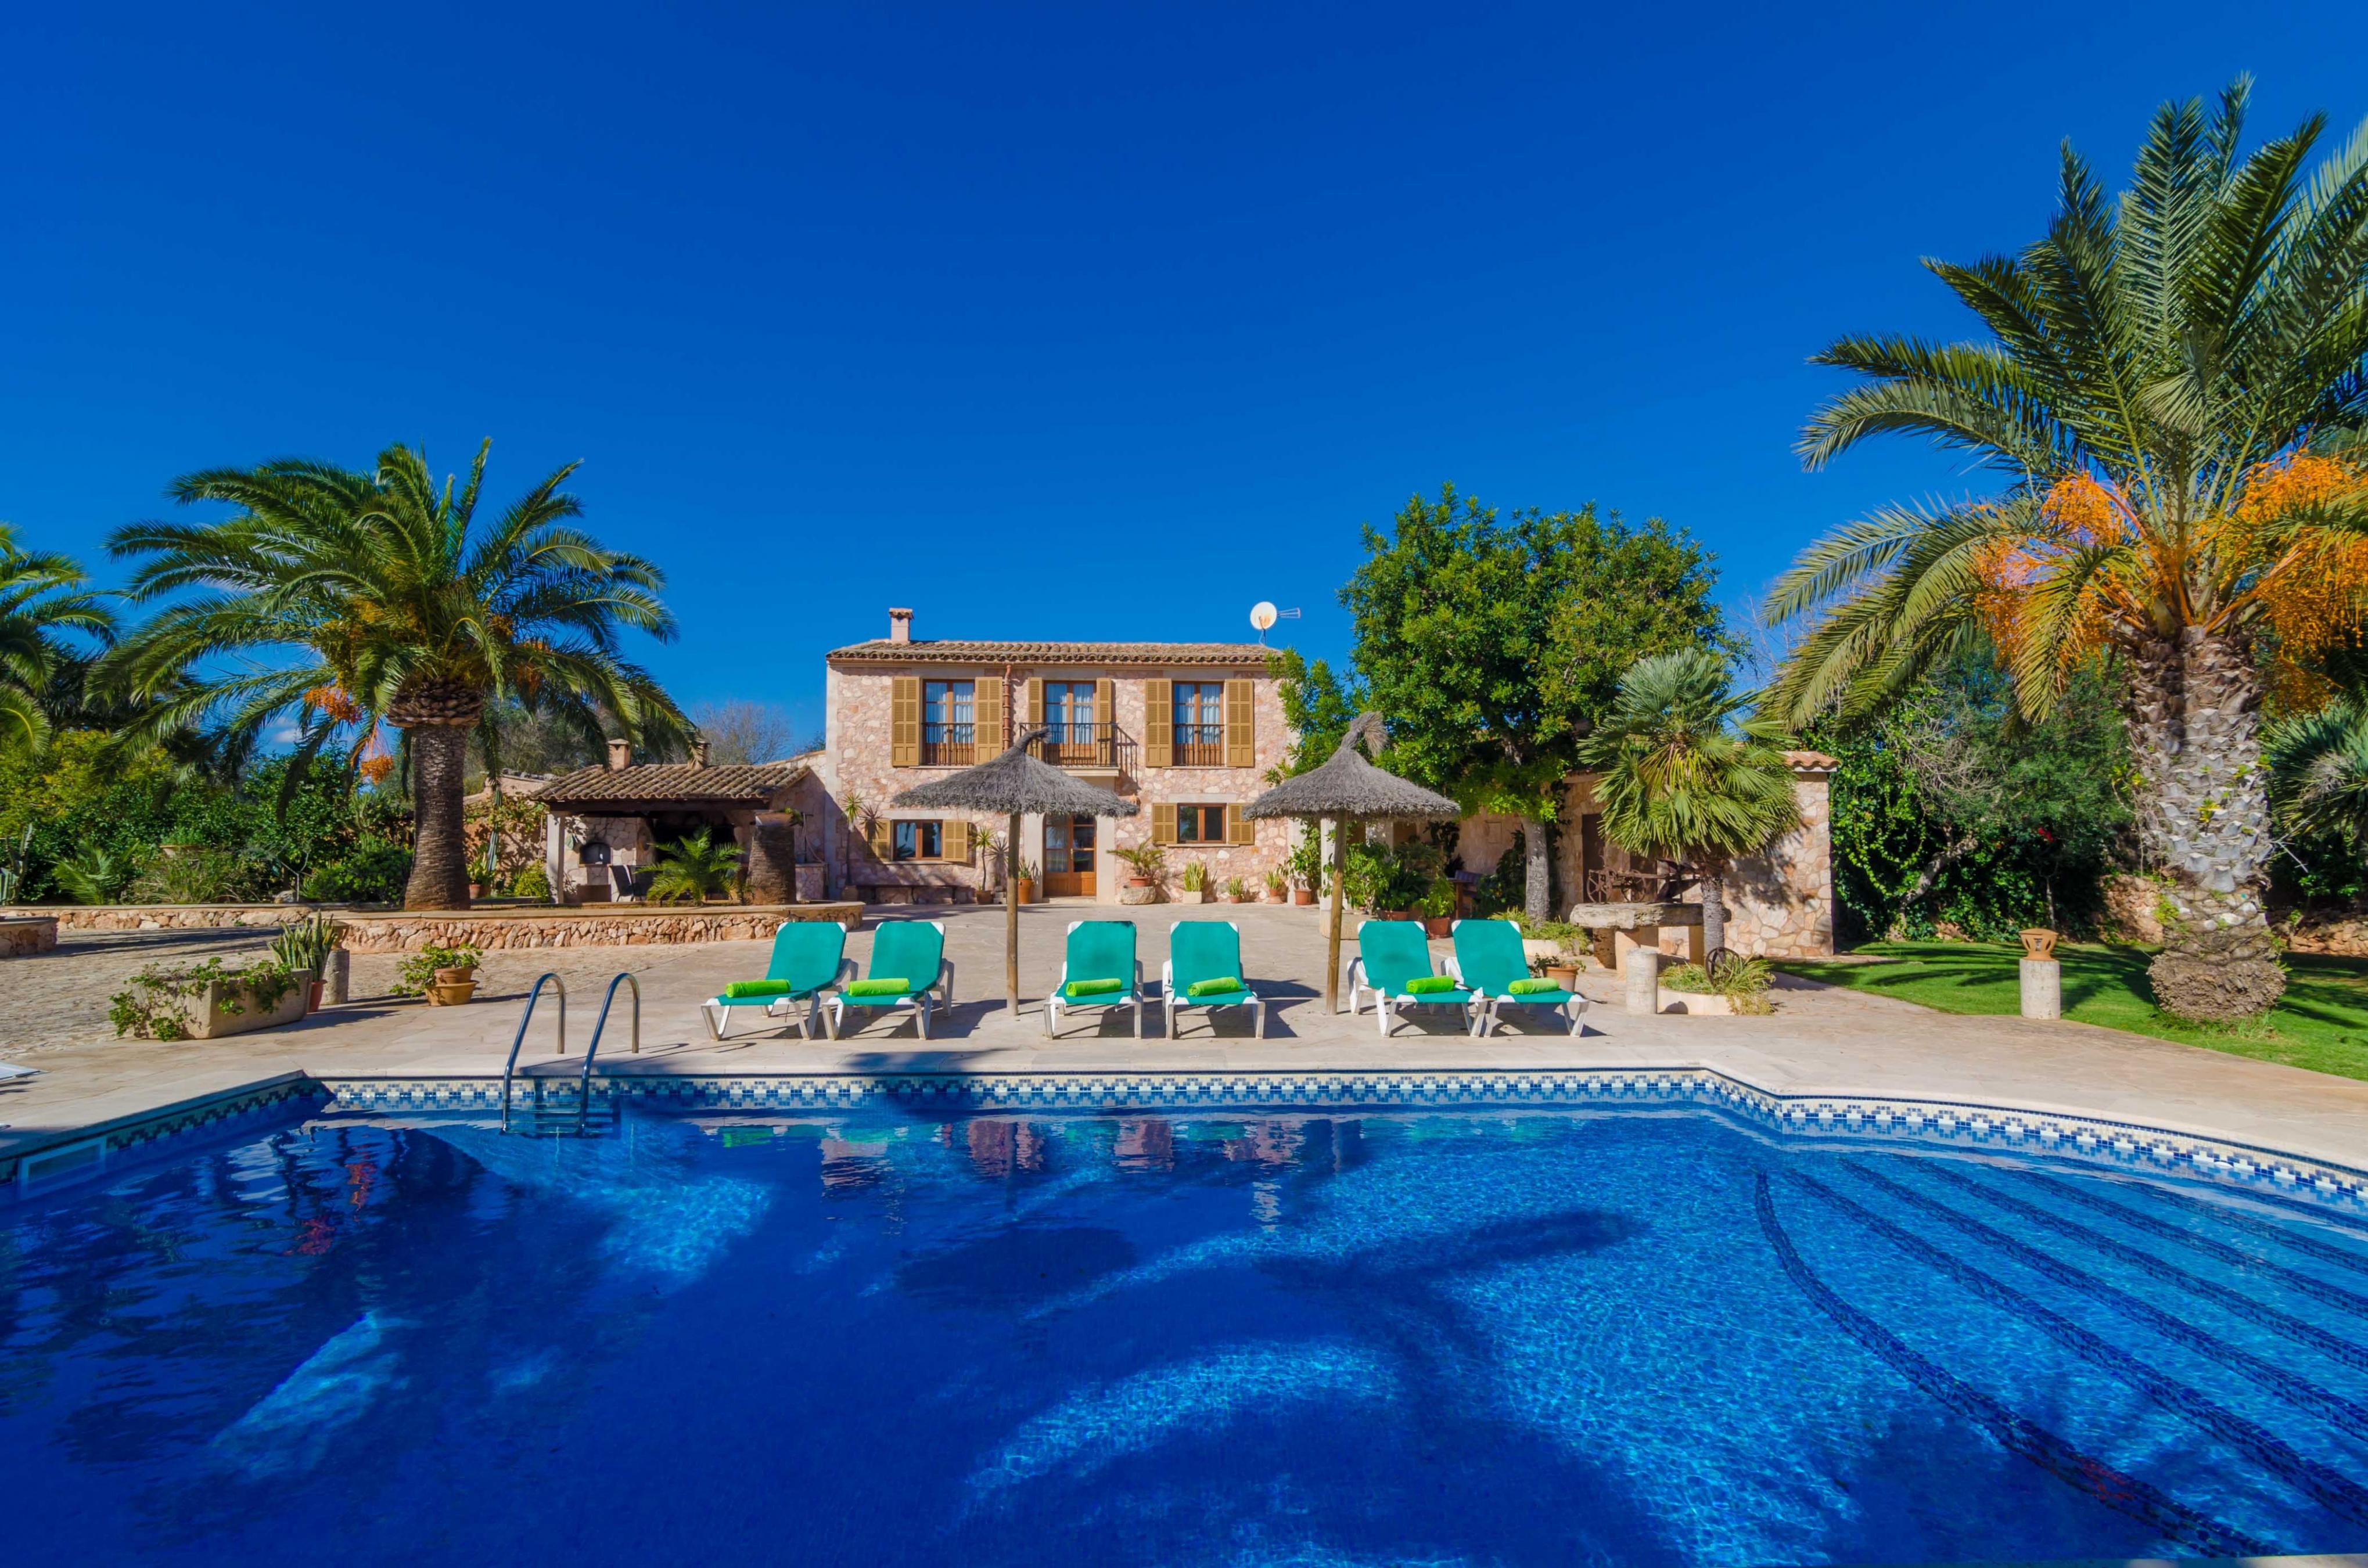 Property Image 2 - ES TURÓ - Great Majorcan finca with private pool, ideal for family holidays. Free WiFi